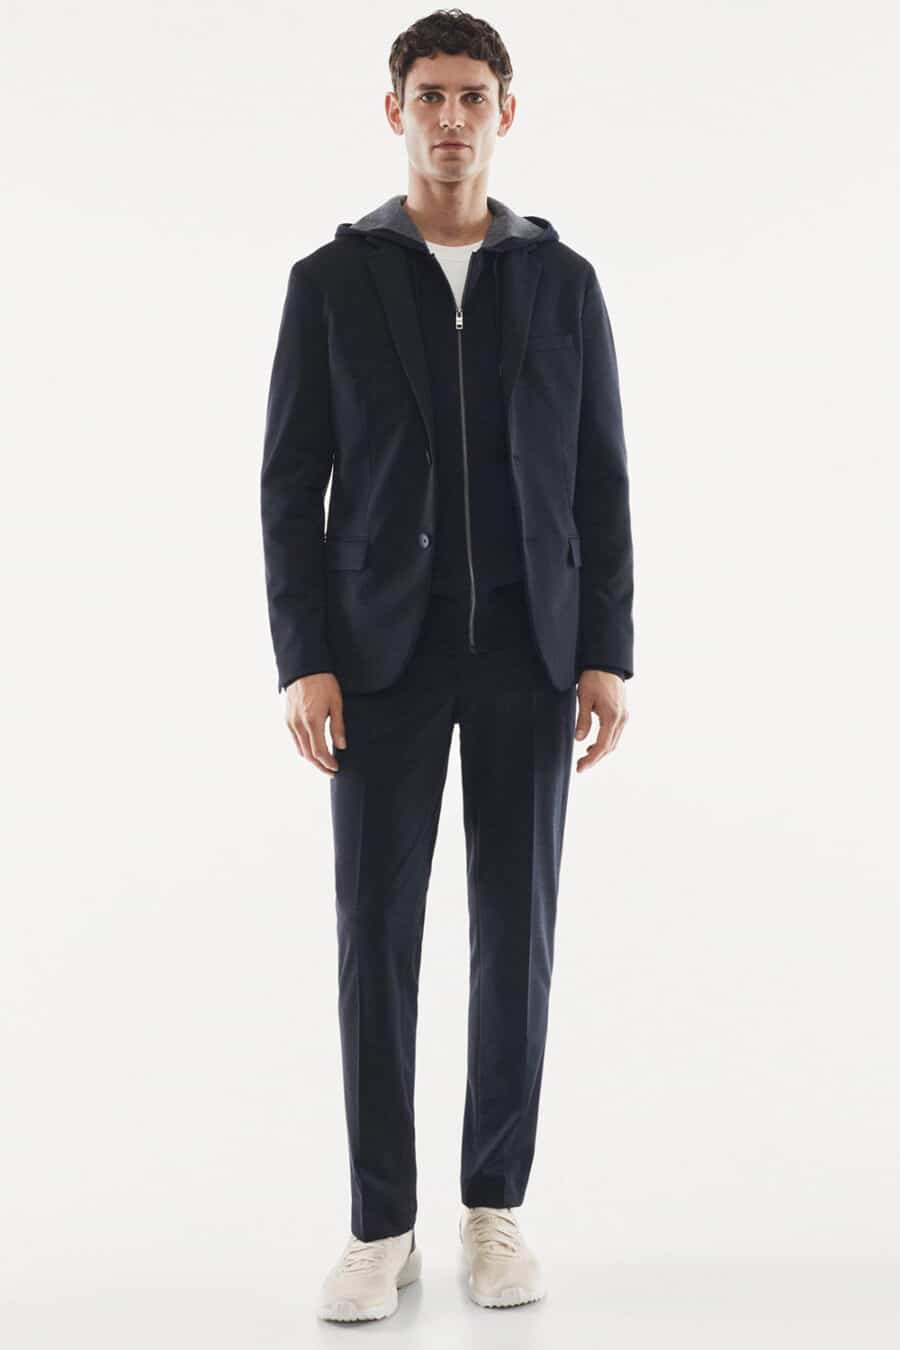 Men's navy suit, navy zip-up hoodie, white T-shirt and cream sneakers outfit